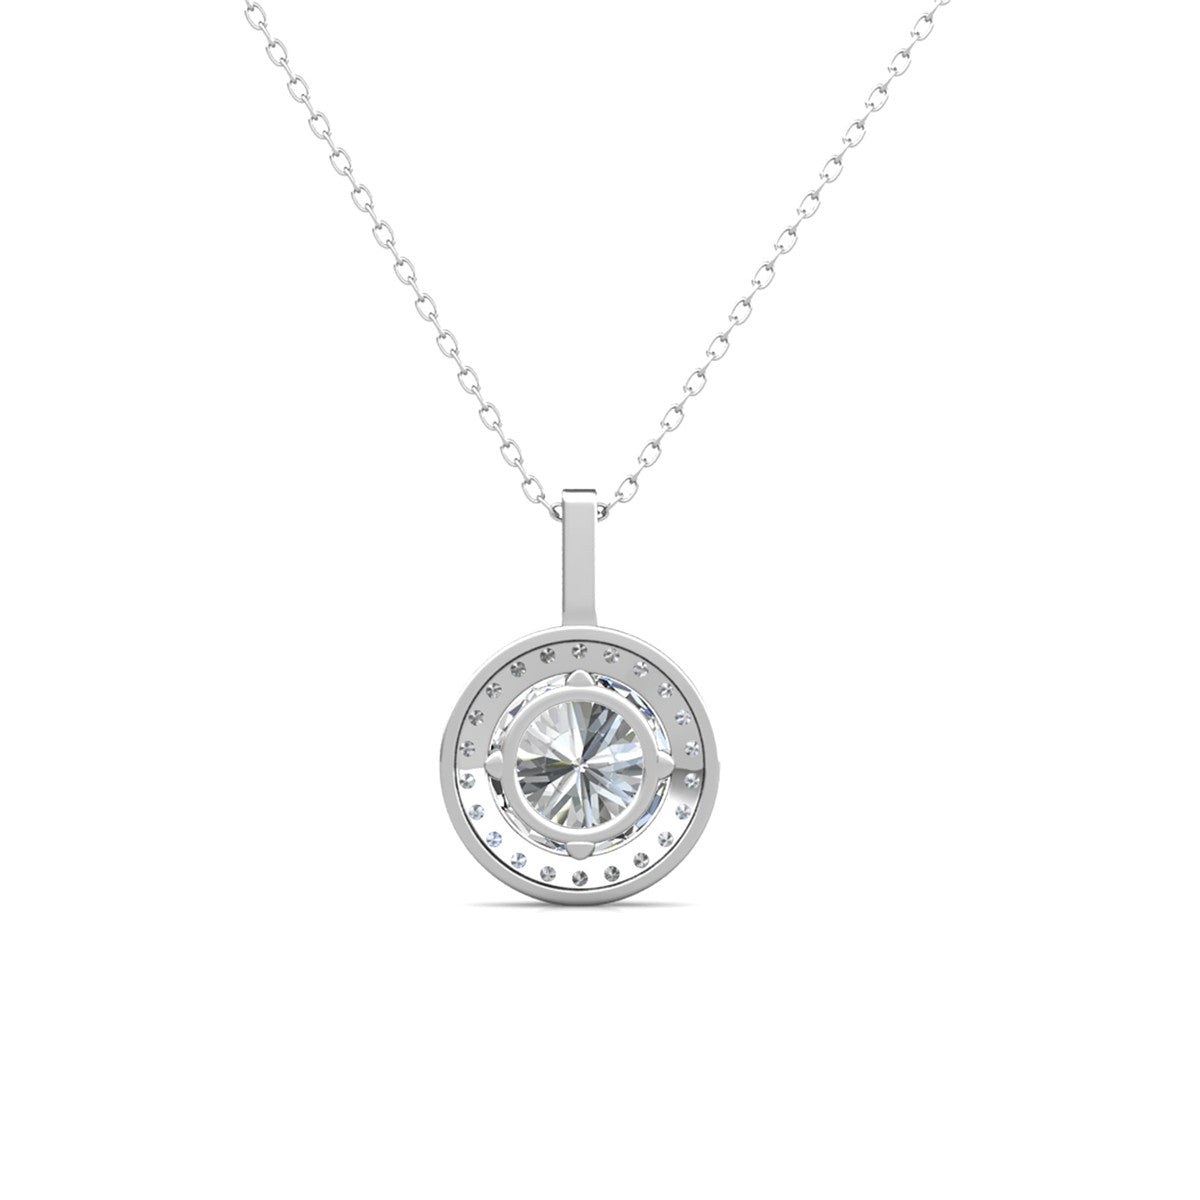 Moissanite by Cate & Chloe Jordan Sterling Silver Necklace with Moissanite Crystals